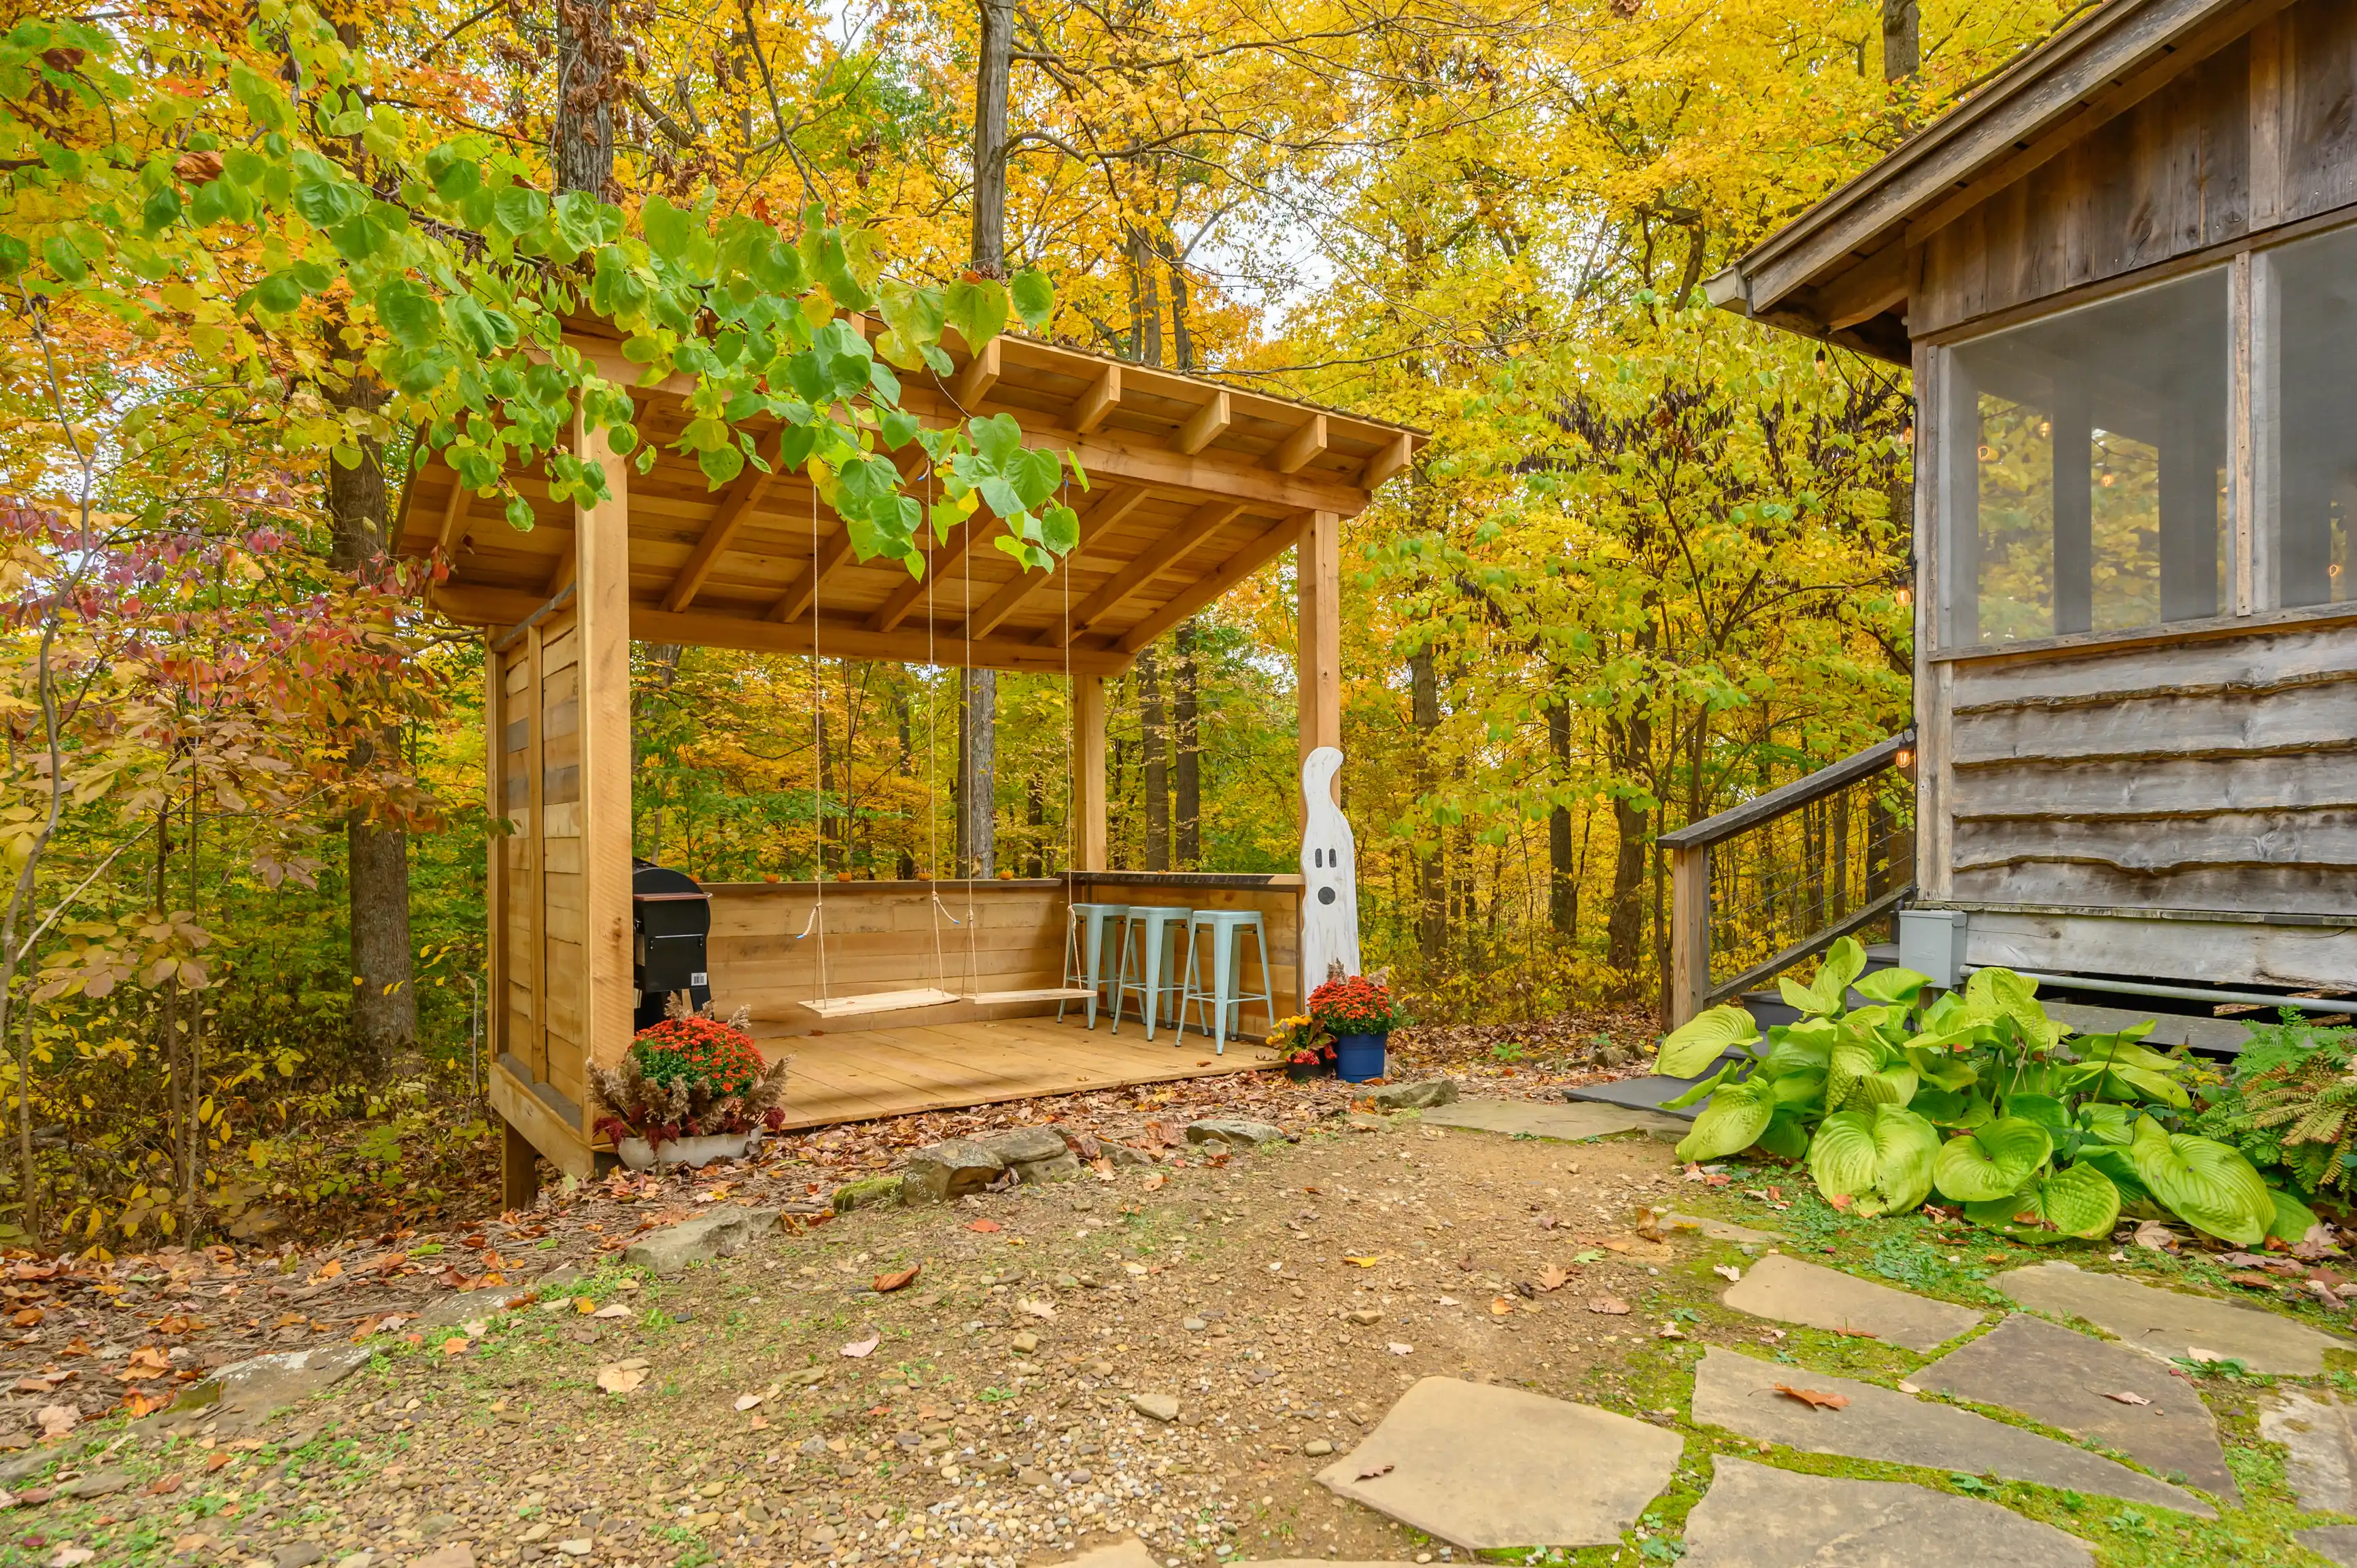 Wooden cabin with adjacent covered patio area in a forest with autumn foliage, featuring a swing, bar stools, and seasonal decorations.